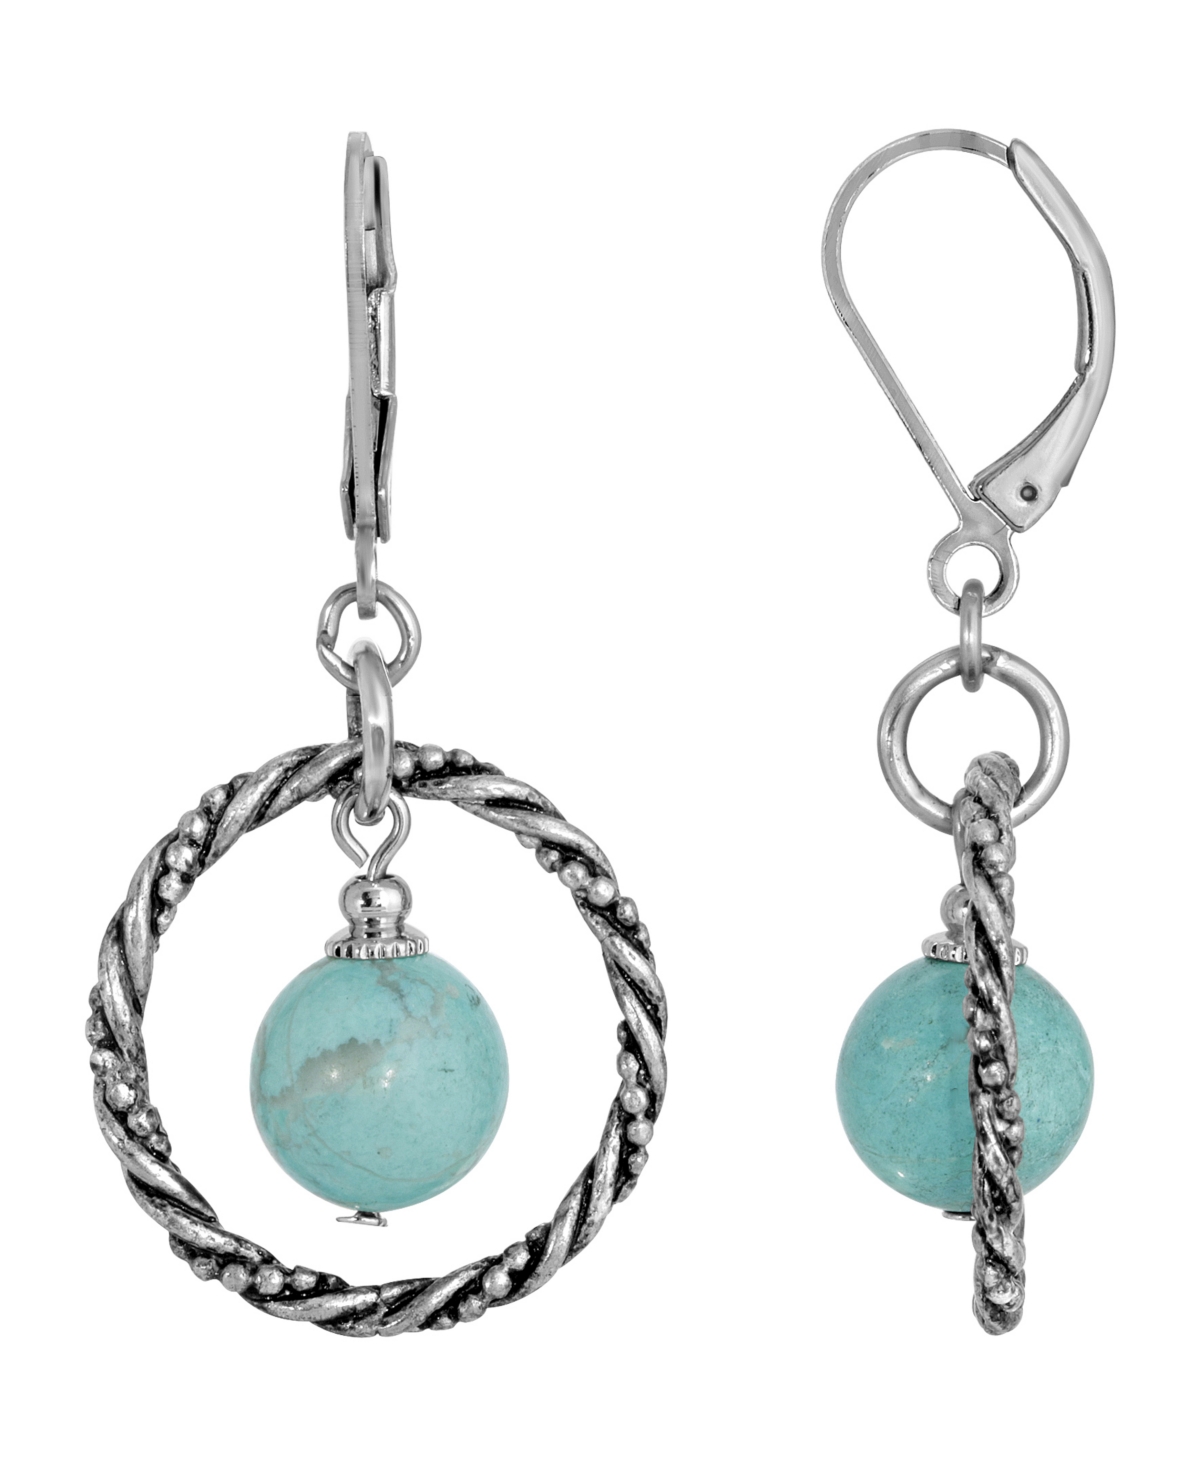 2028 Silver-tone Genuine Stone Turquoise Round Stone Hoop Earrings In Sapphire